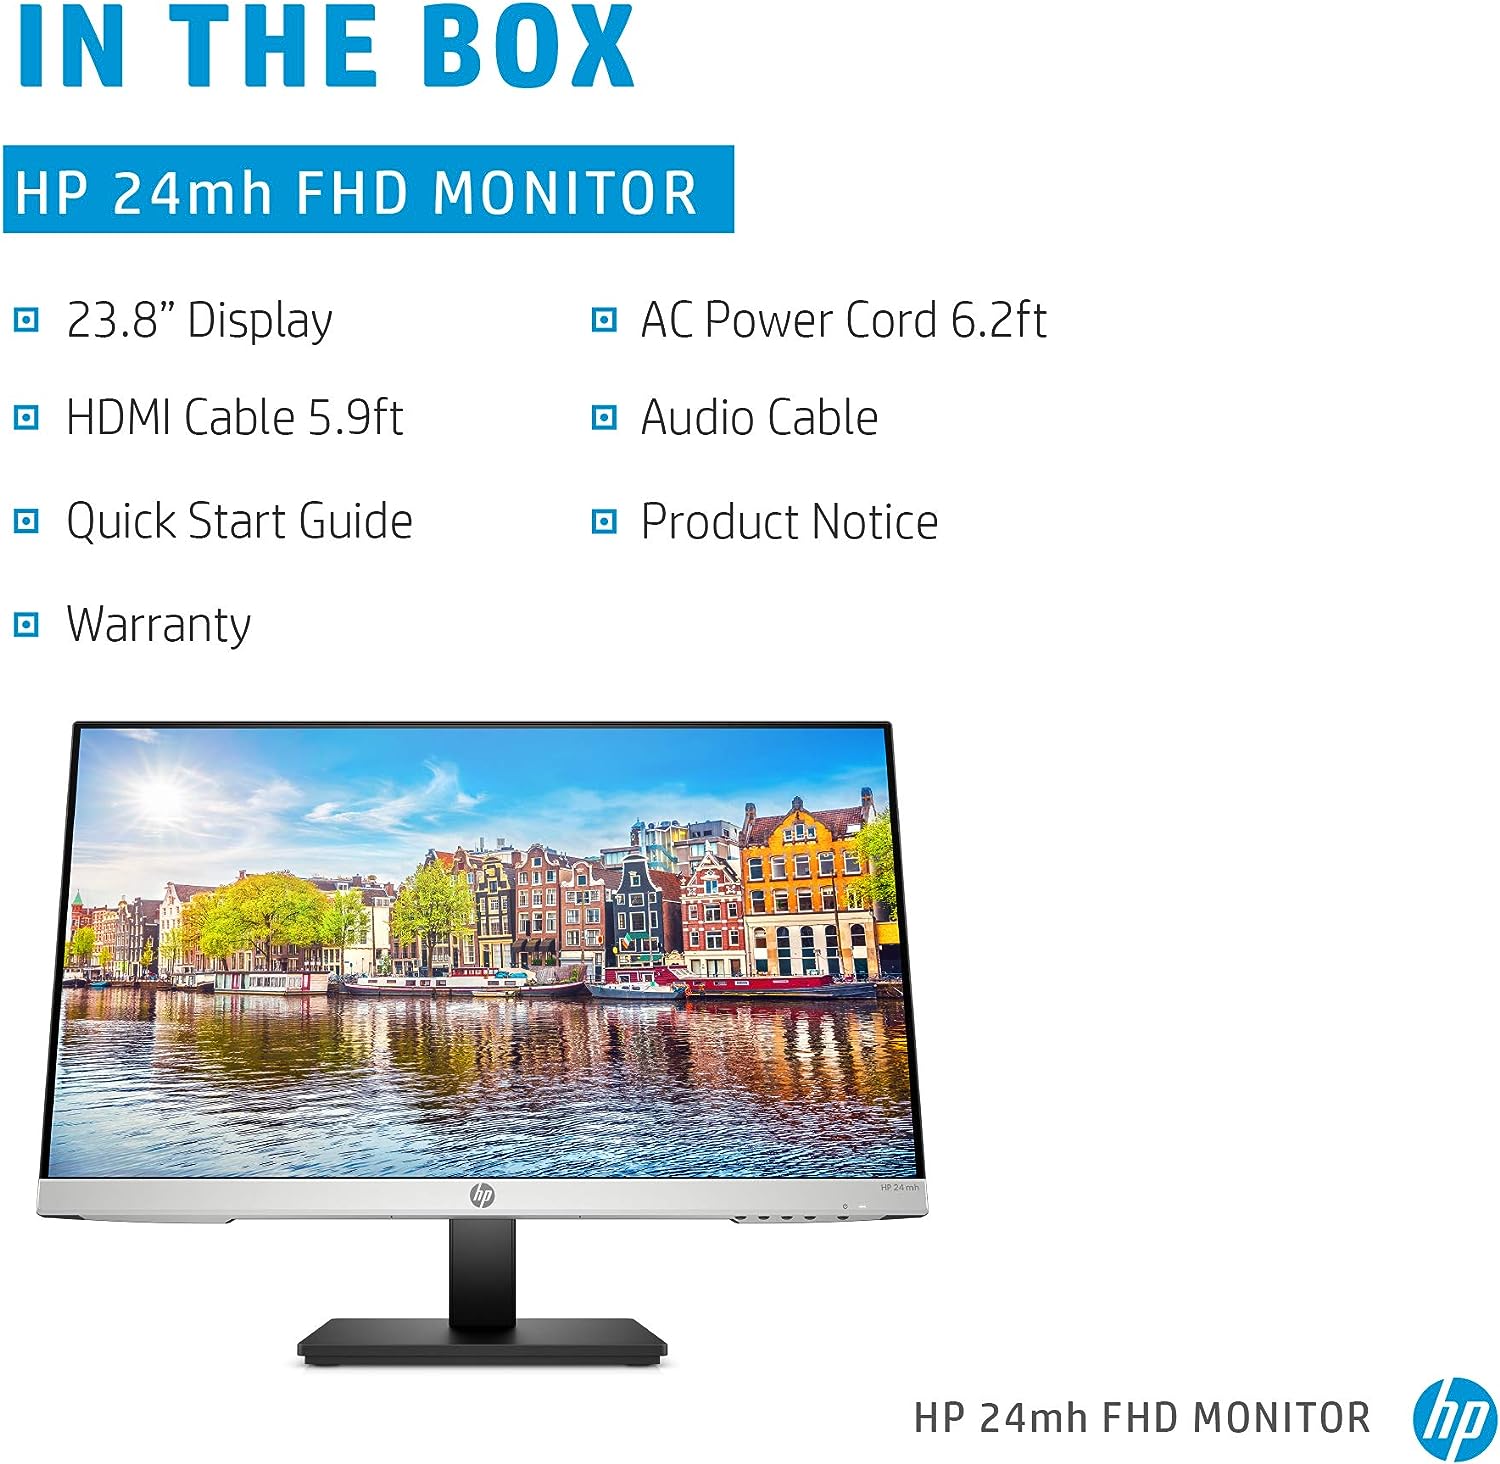 HP 24mh FHD Monitor Review